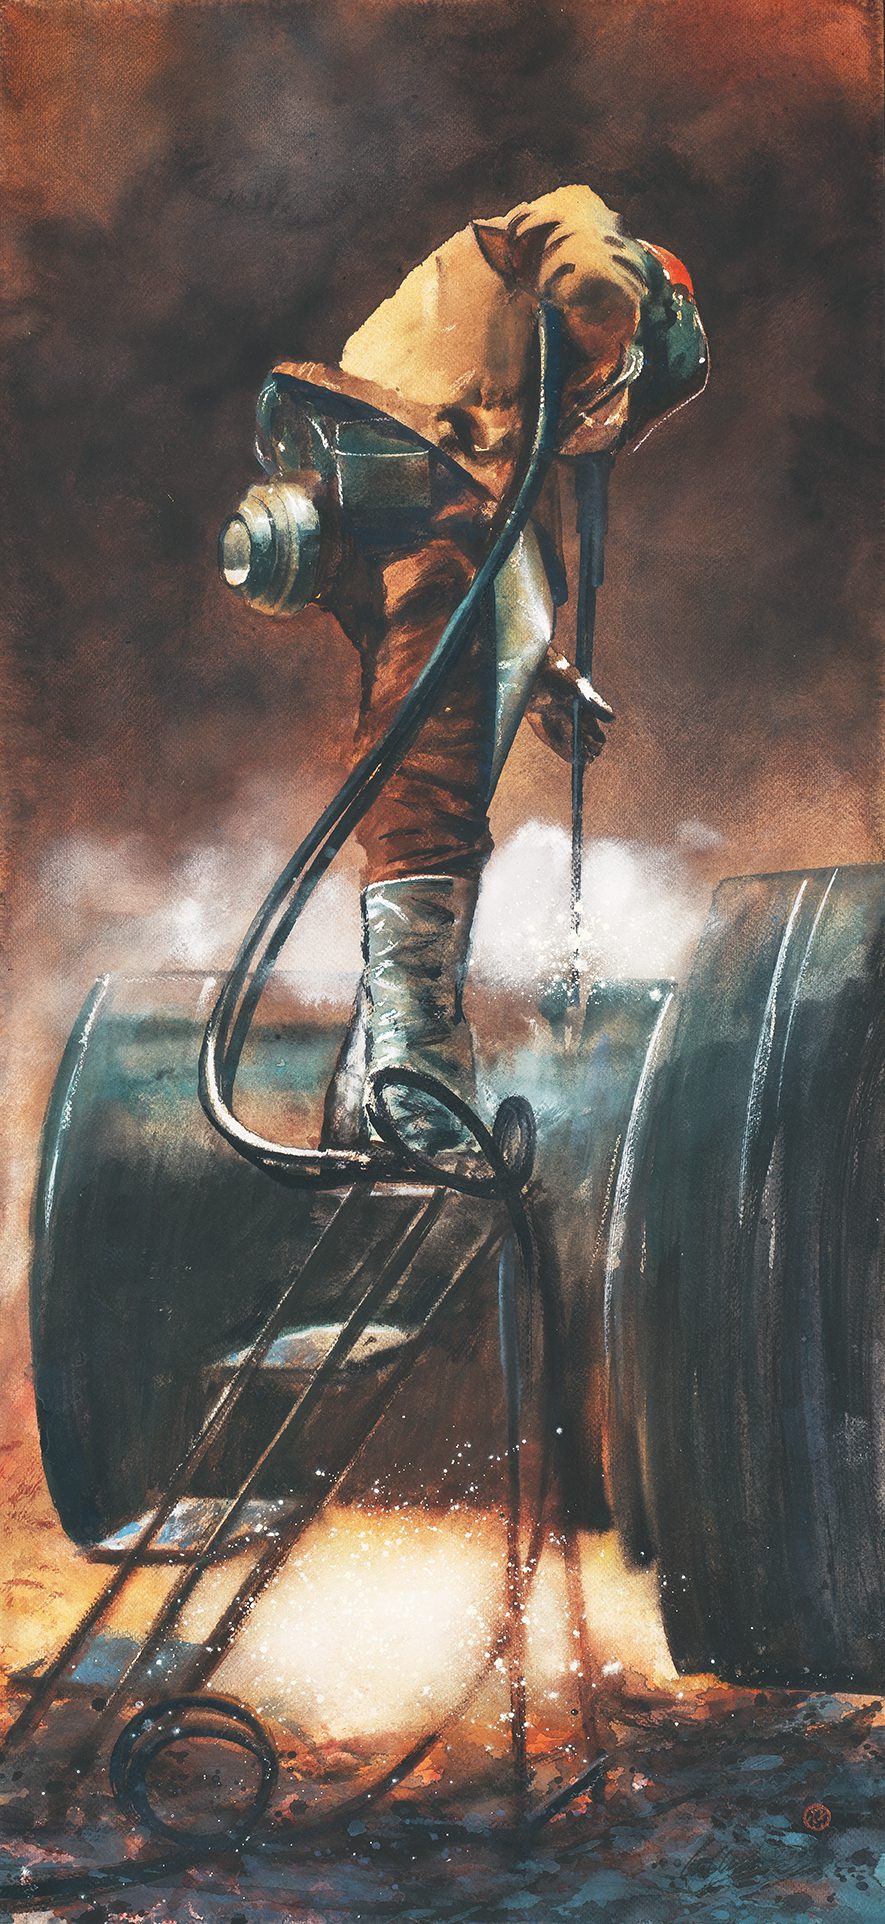 Painting of a man welding